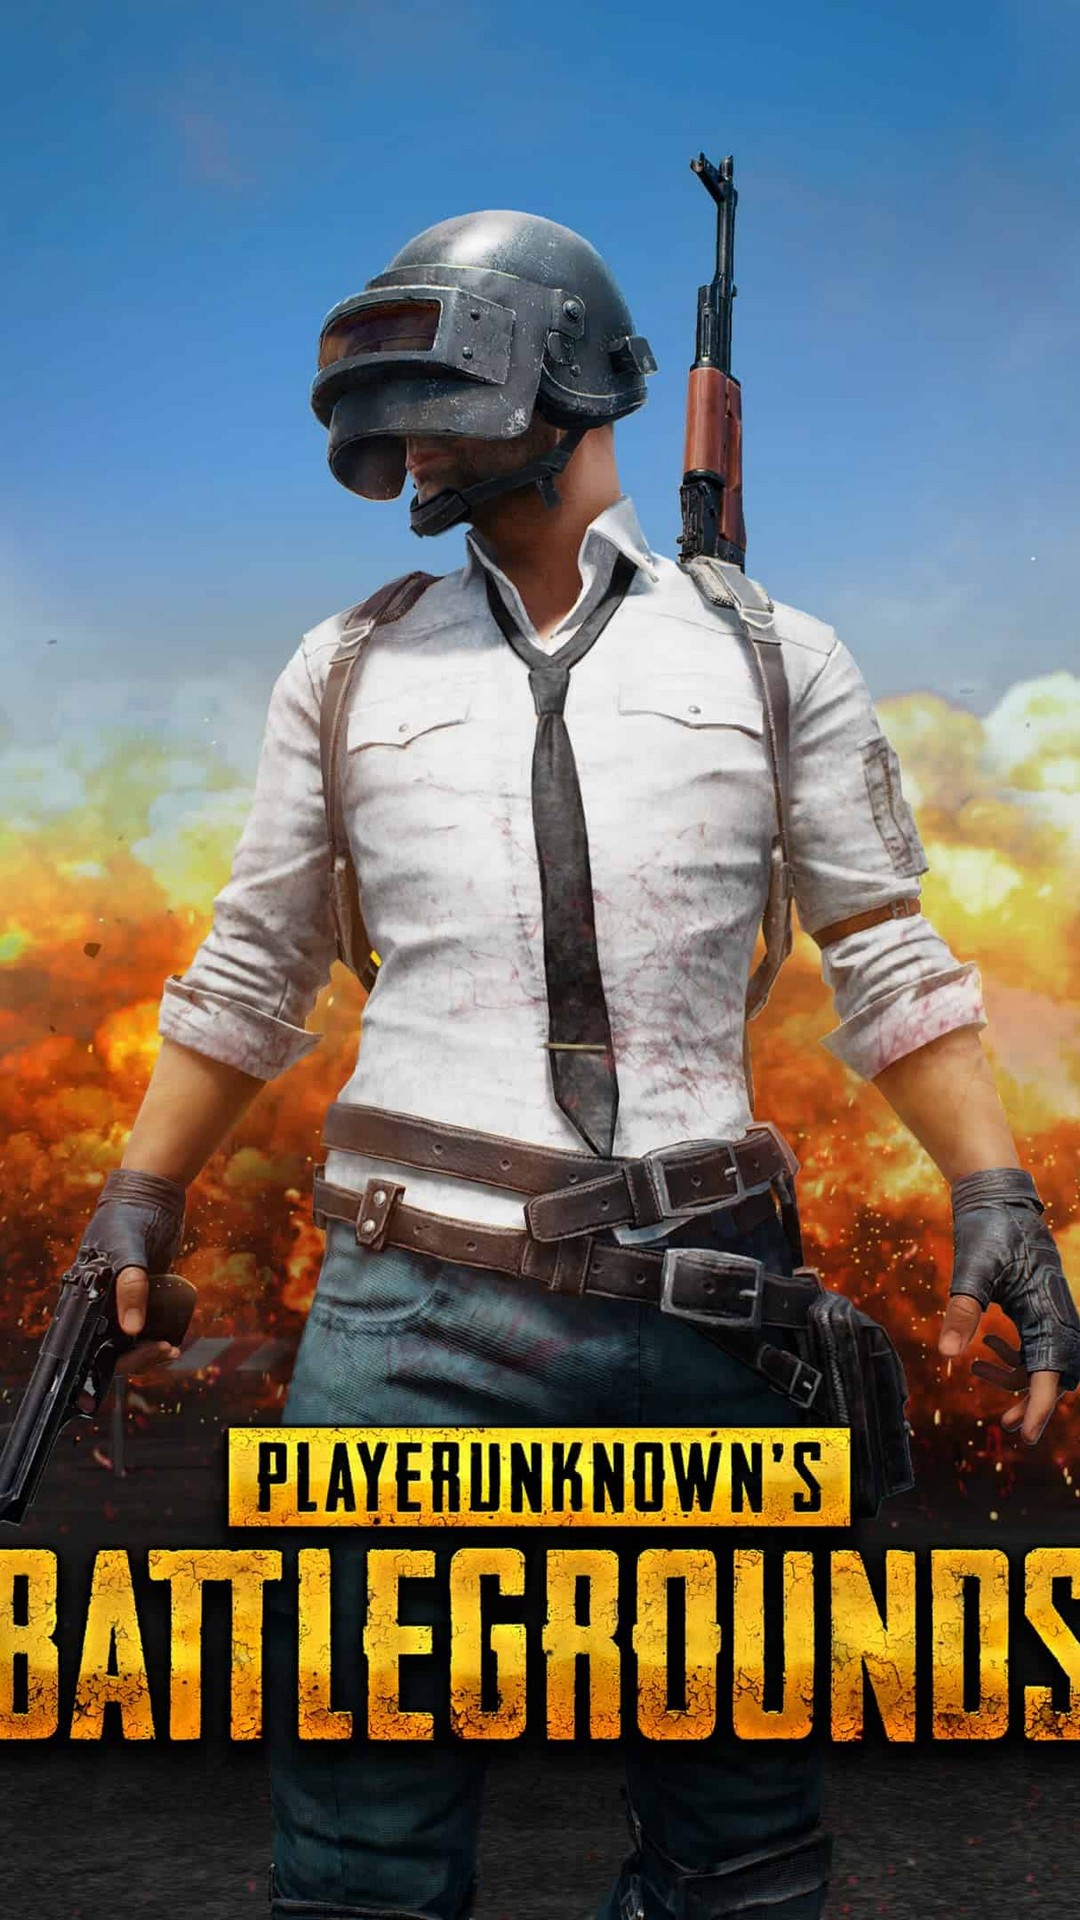 PUBG Mobile iPhone 6 Wallpaper with image resolution 1080x1920 pixel. You can use this wallpaper as background for your desktop Computer Screensavers, Android or iPhone smartphones